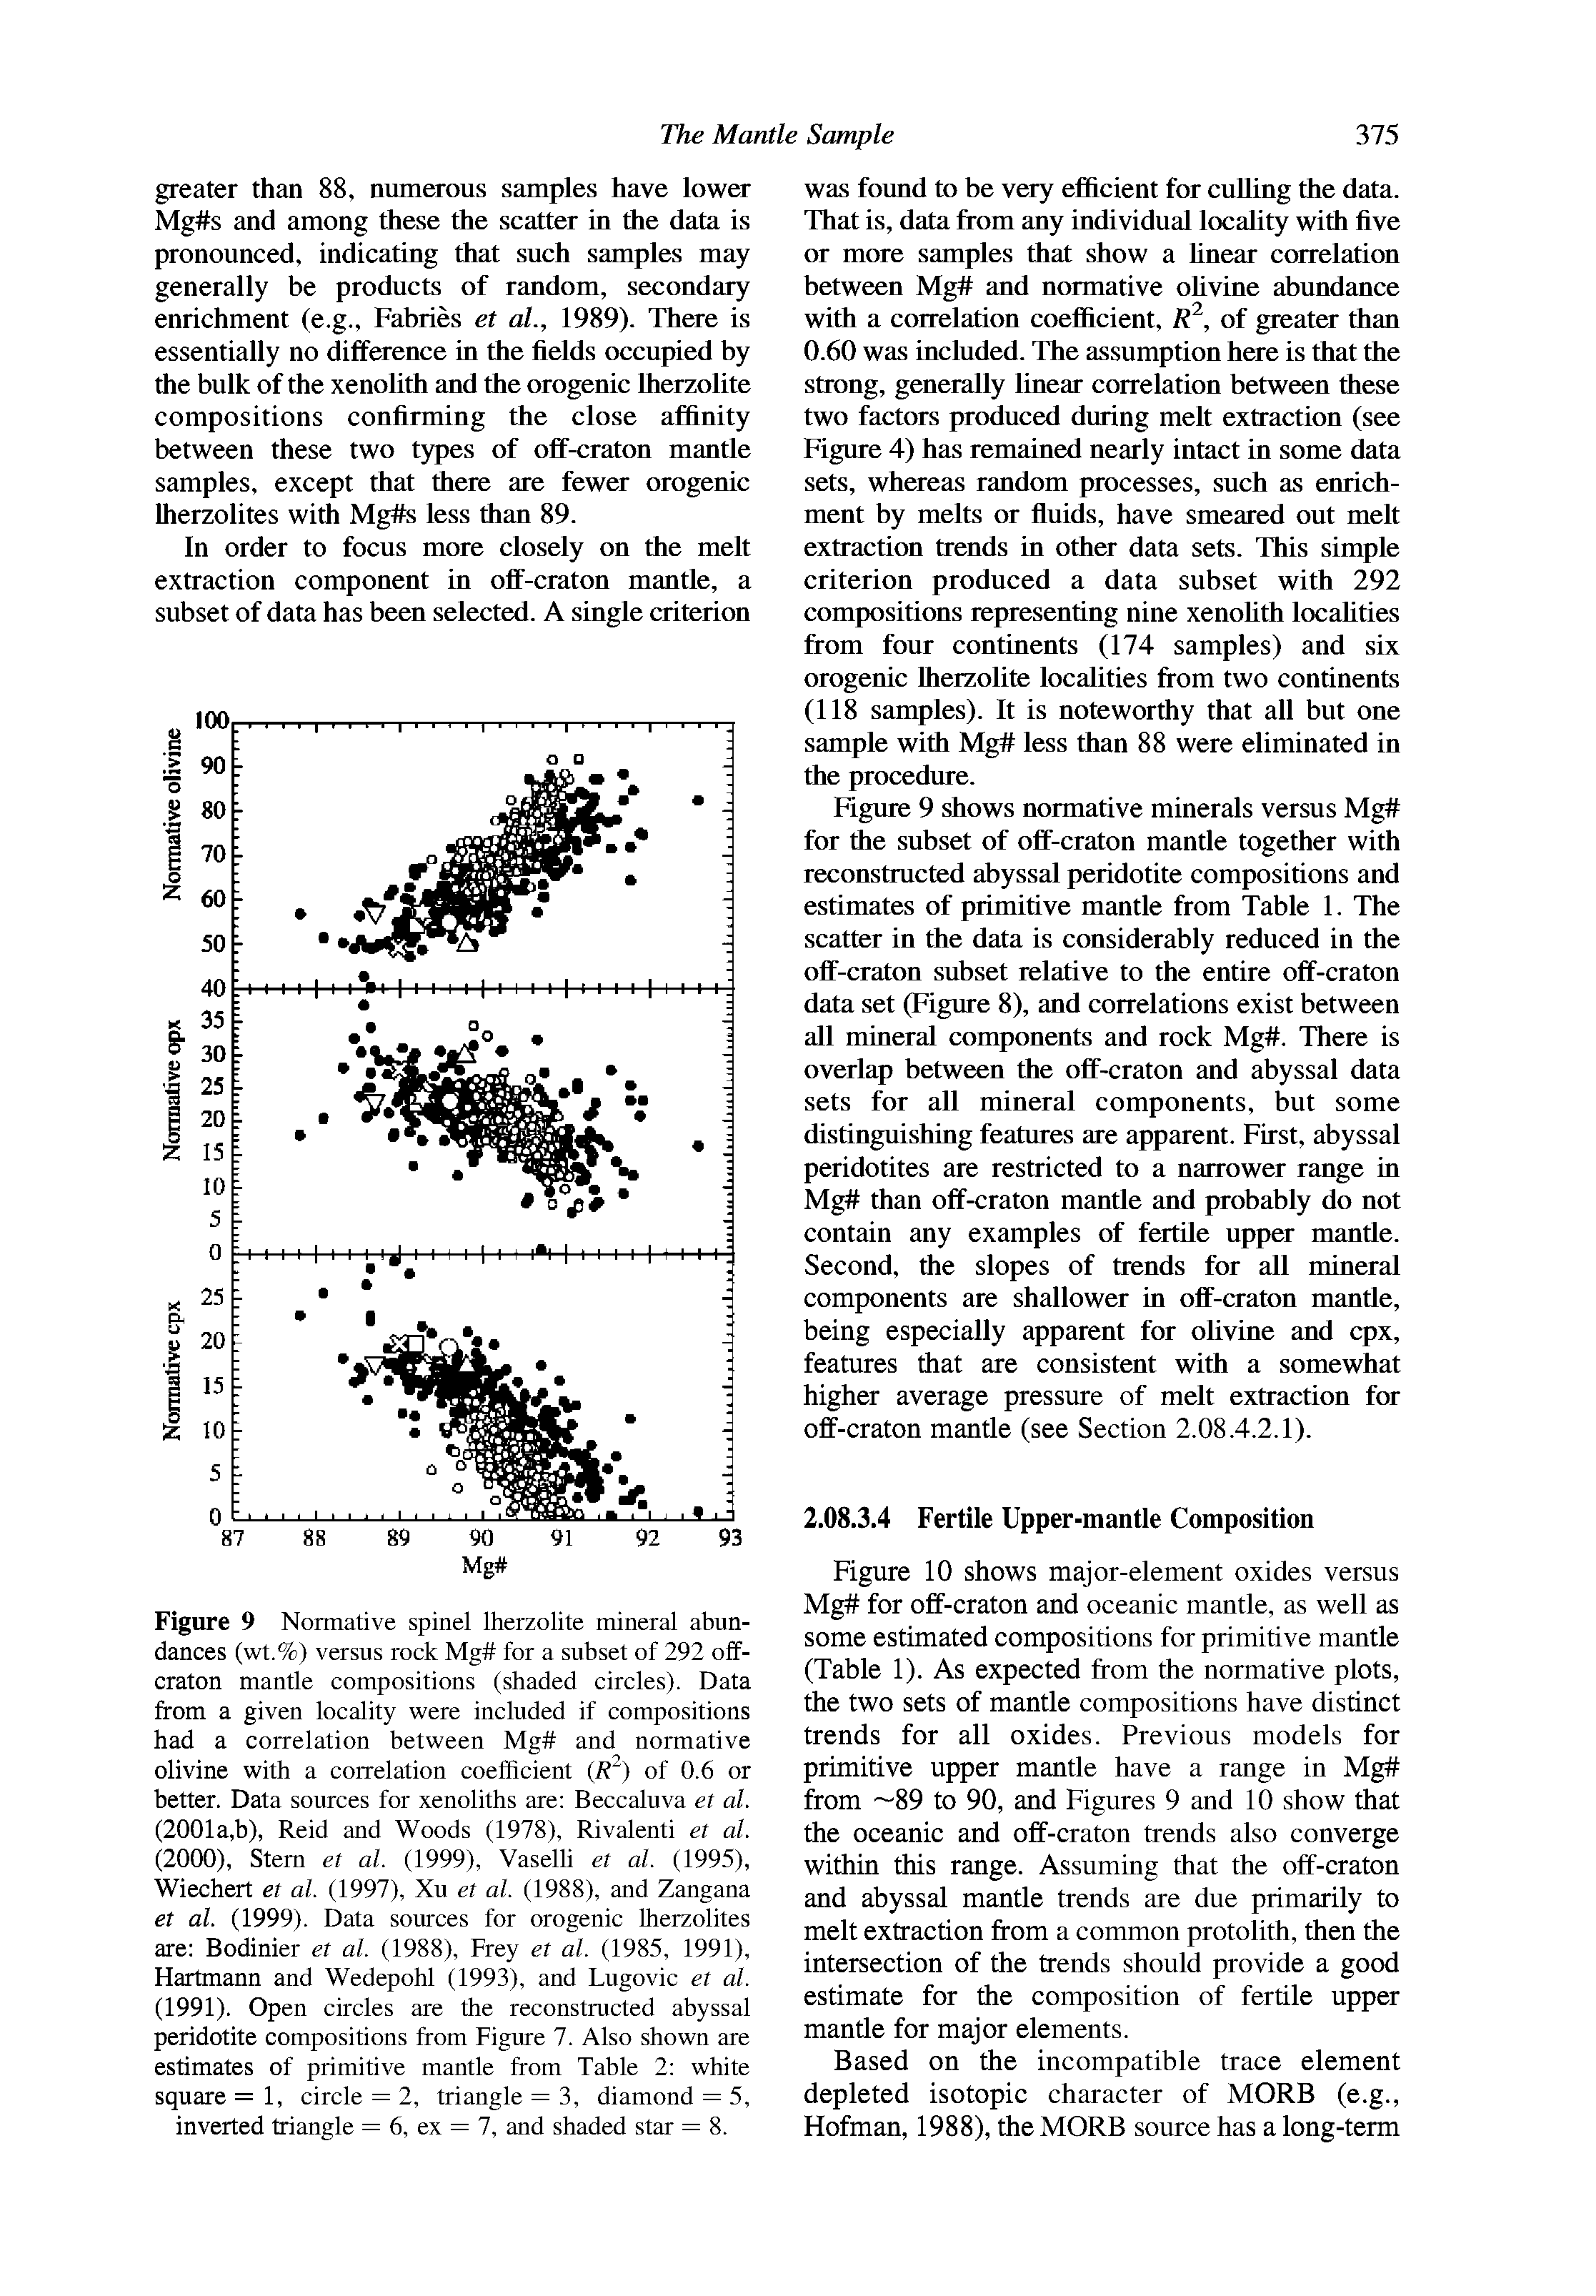 Figure 9 Normative spinel Iherzolite mineral abundances (wt.%) versus rock Mg for a subset of 292 off-craton mantle compositions (shaded circles). Data from a given locality were included if compositions had a correlation between Mg and normative olivine with a correlation coefficient (i ) of 0.6 or better. Data sources for xenoliths are Beccaluva et al. (2001a,h), Reid and Woods (1978), Rivalenti et al. (2000), Stem et al. (1999), Vaselli et al. (1995), Wiechert et al. (1997), Xu et al. (1988), and Zangana et al. (1999). Data sources for orogenic Iherzolites are Bodinier et al. (1988), Frey et al. (1985, 1991), Hartmann and Wedepohl (1993), and Lugovic et al. (1991). Open circles are the reconstmcted abyssal peridotite compositions from Figure 7. Also shown are estimates of primitive mantle from Table 2 white square = 1, circle = 2, triangle = 3, diamond = 5, inverted triangle = 6, ex = 7, and shaded star = 8.